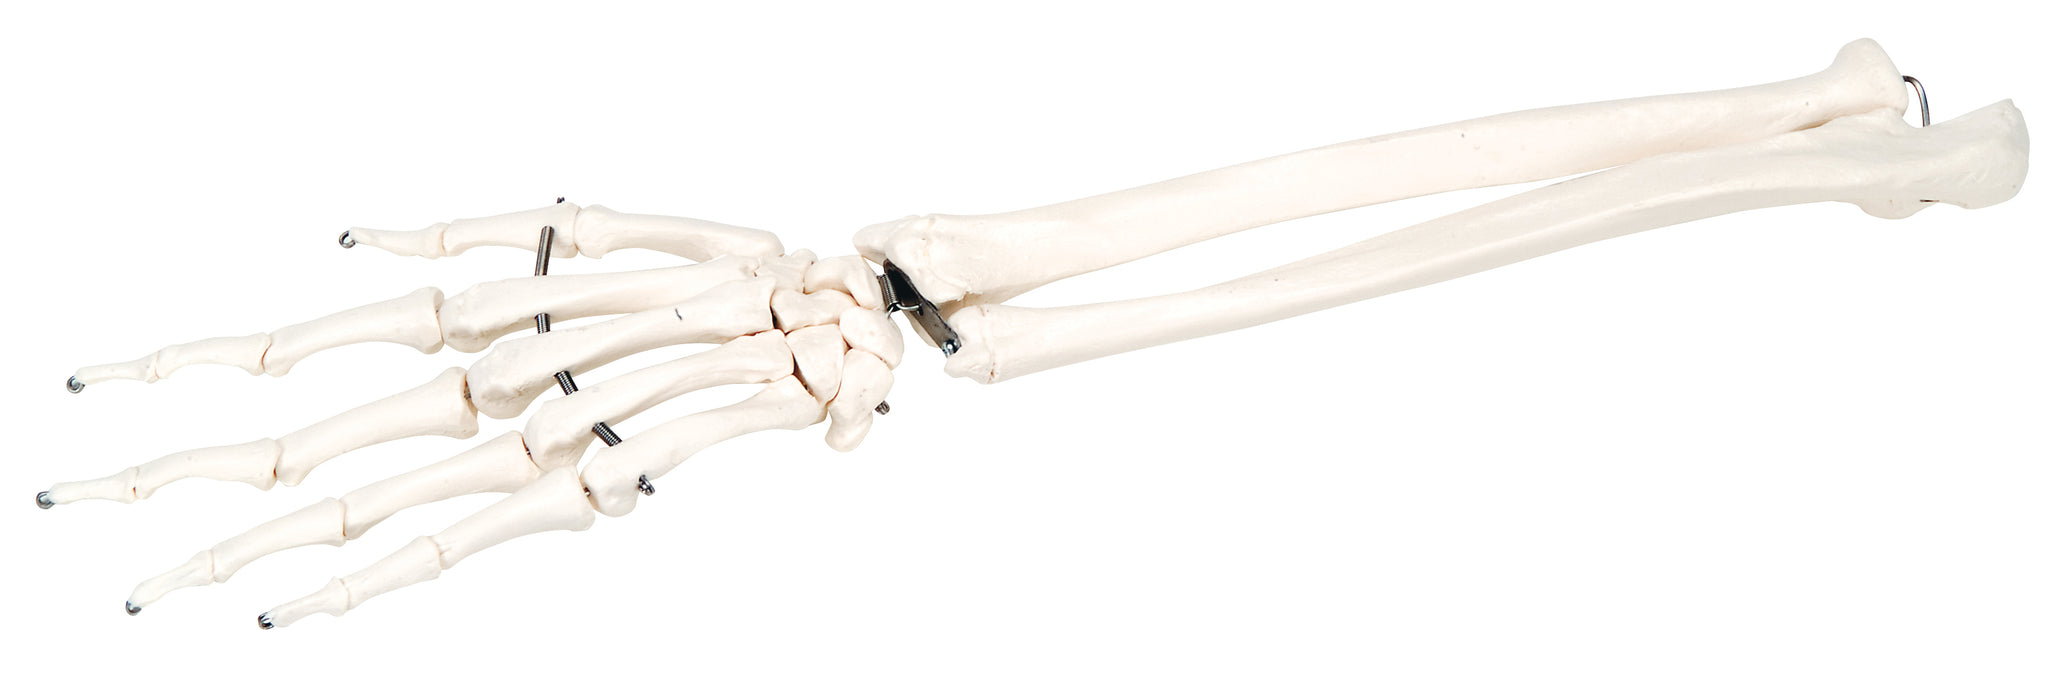 3B Scientific 12-4581R Anatomical Model - Loose Bones, Hand Skeleton With Ulna And Radius (Wire) - Includes 3B Smart Anatomy